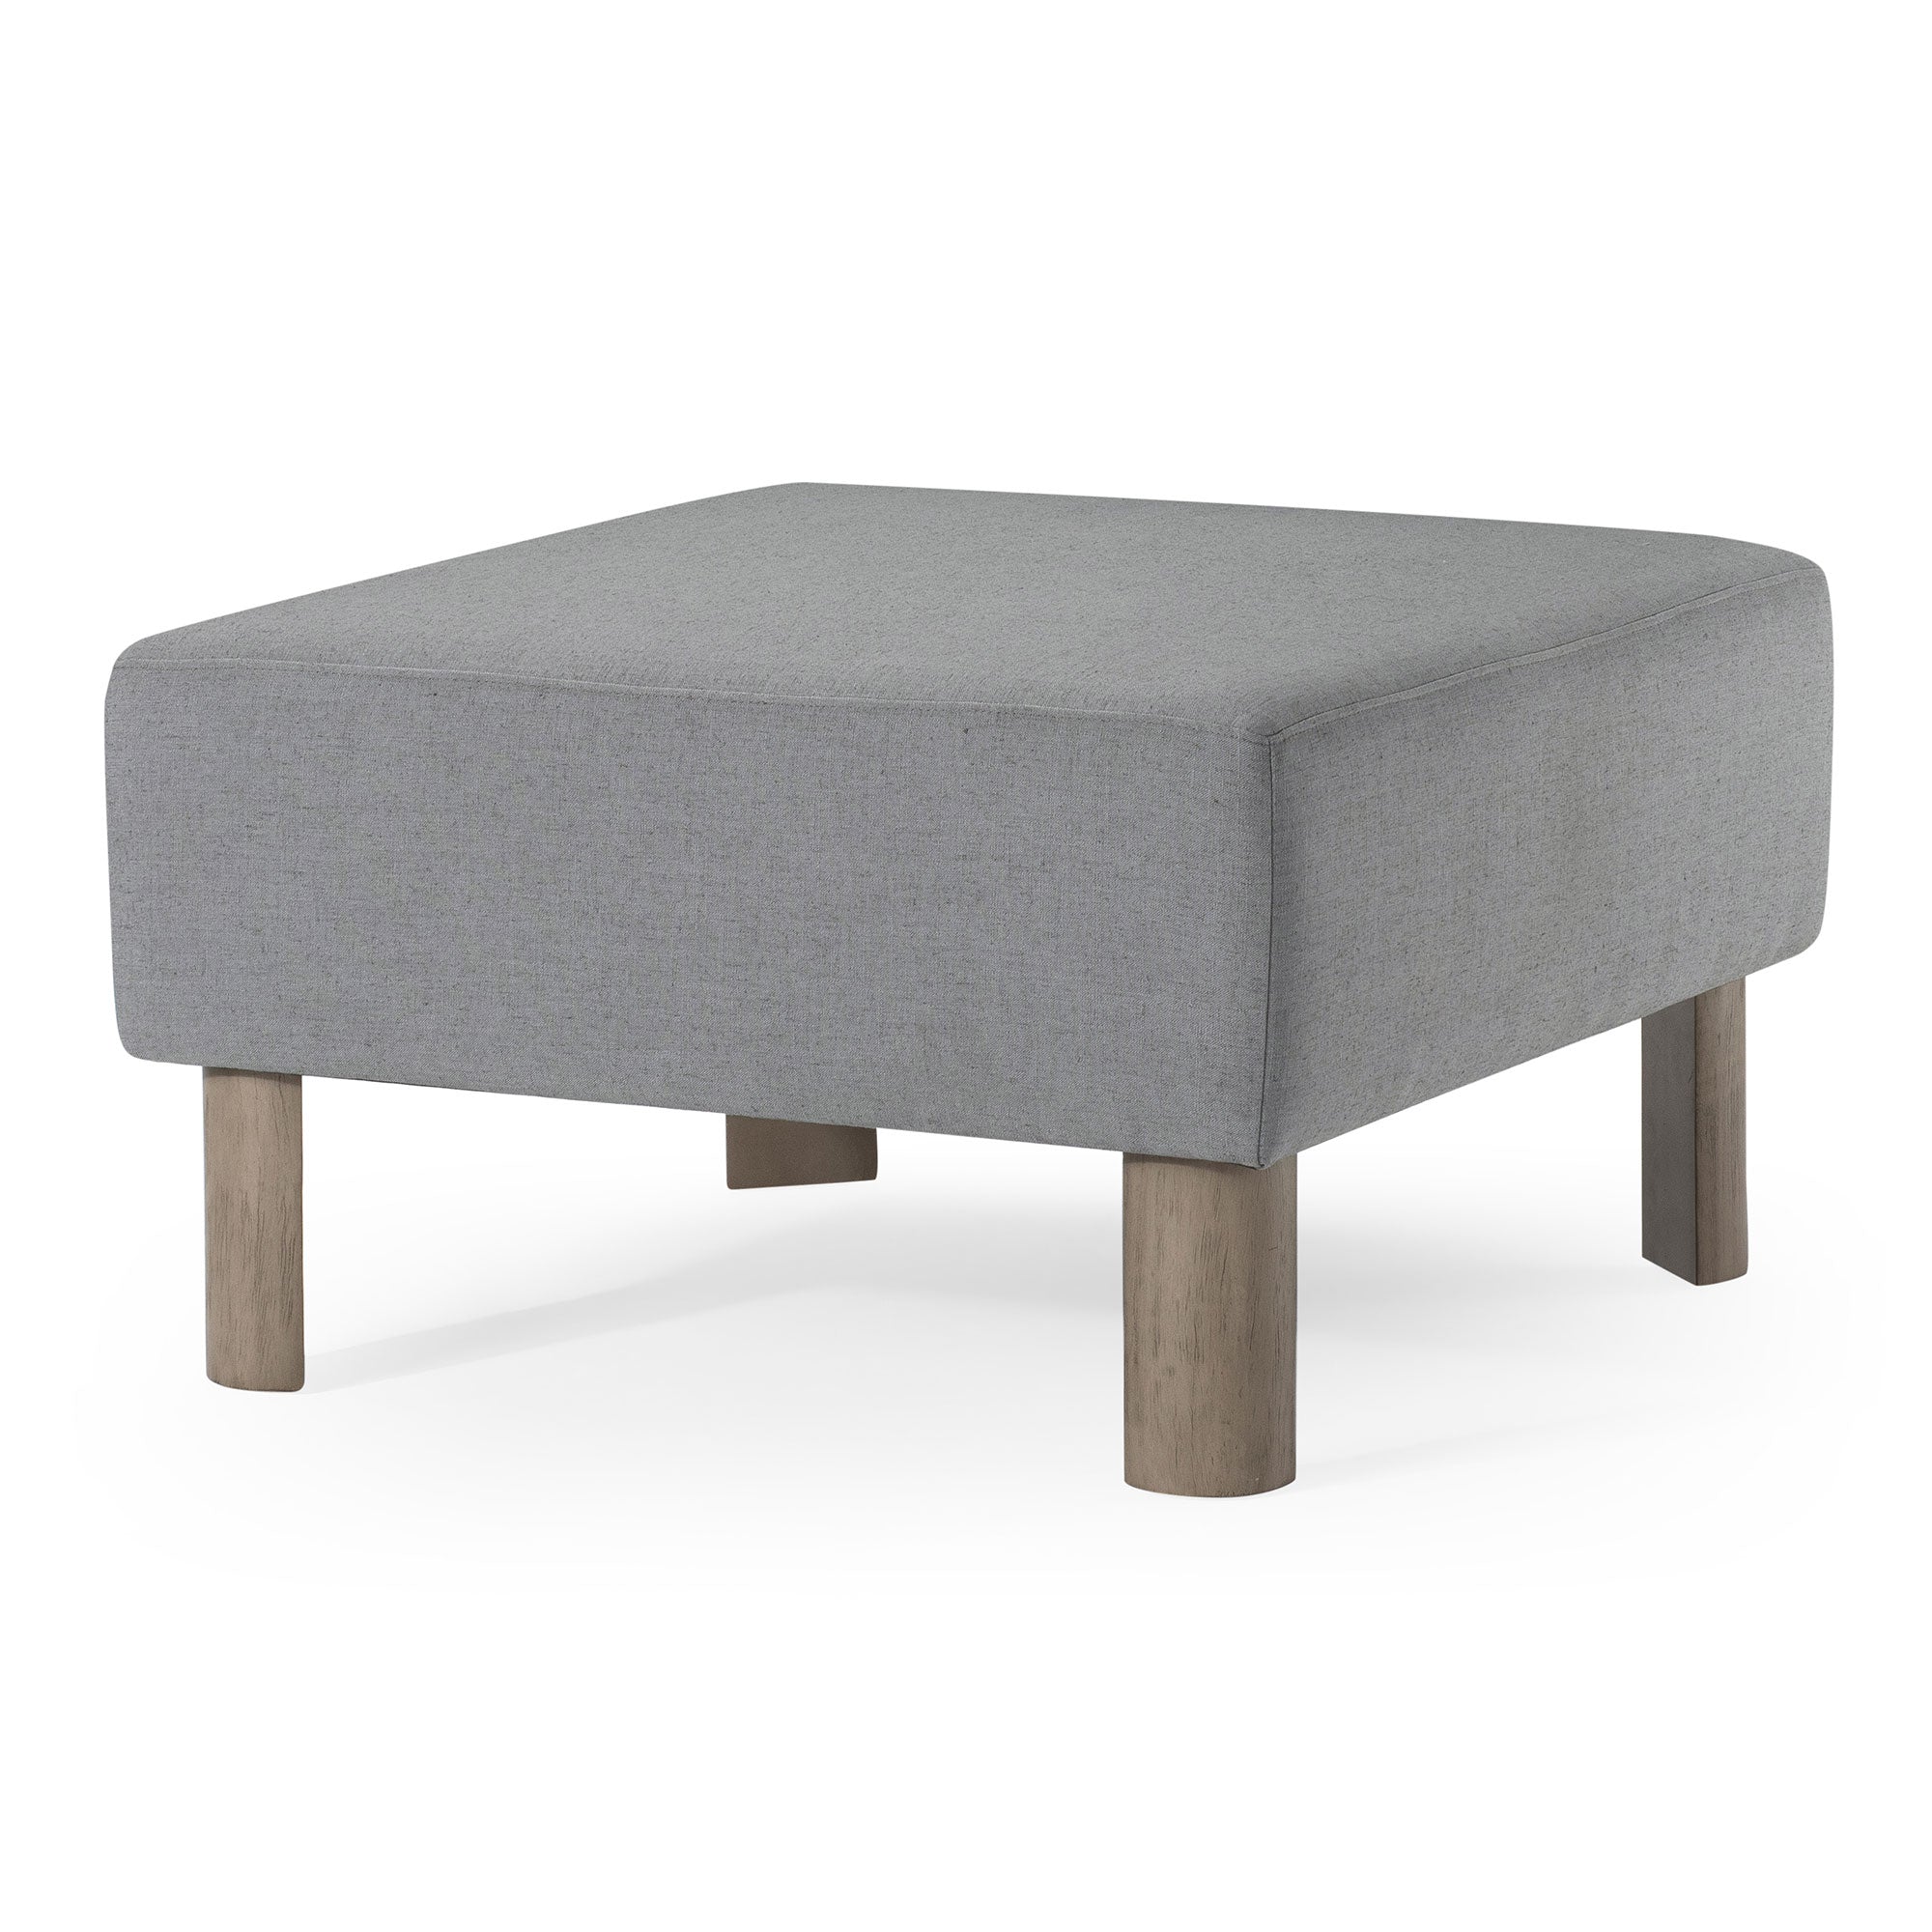 Lena Contemporary Upholstered Ottoman with Refined Grey Wood Finish in Ottomans & Benches by Maven Lane